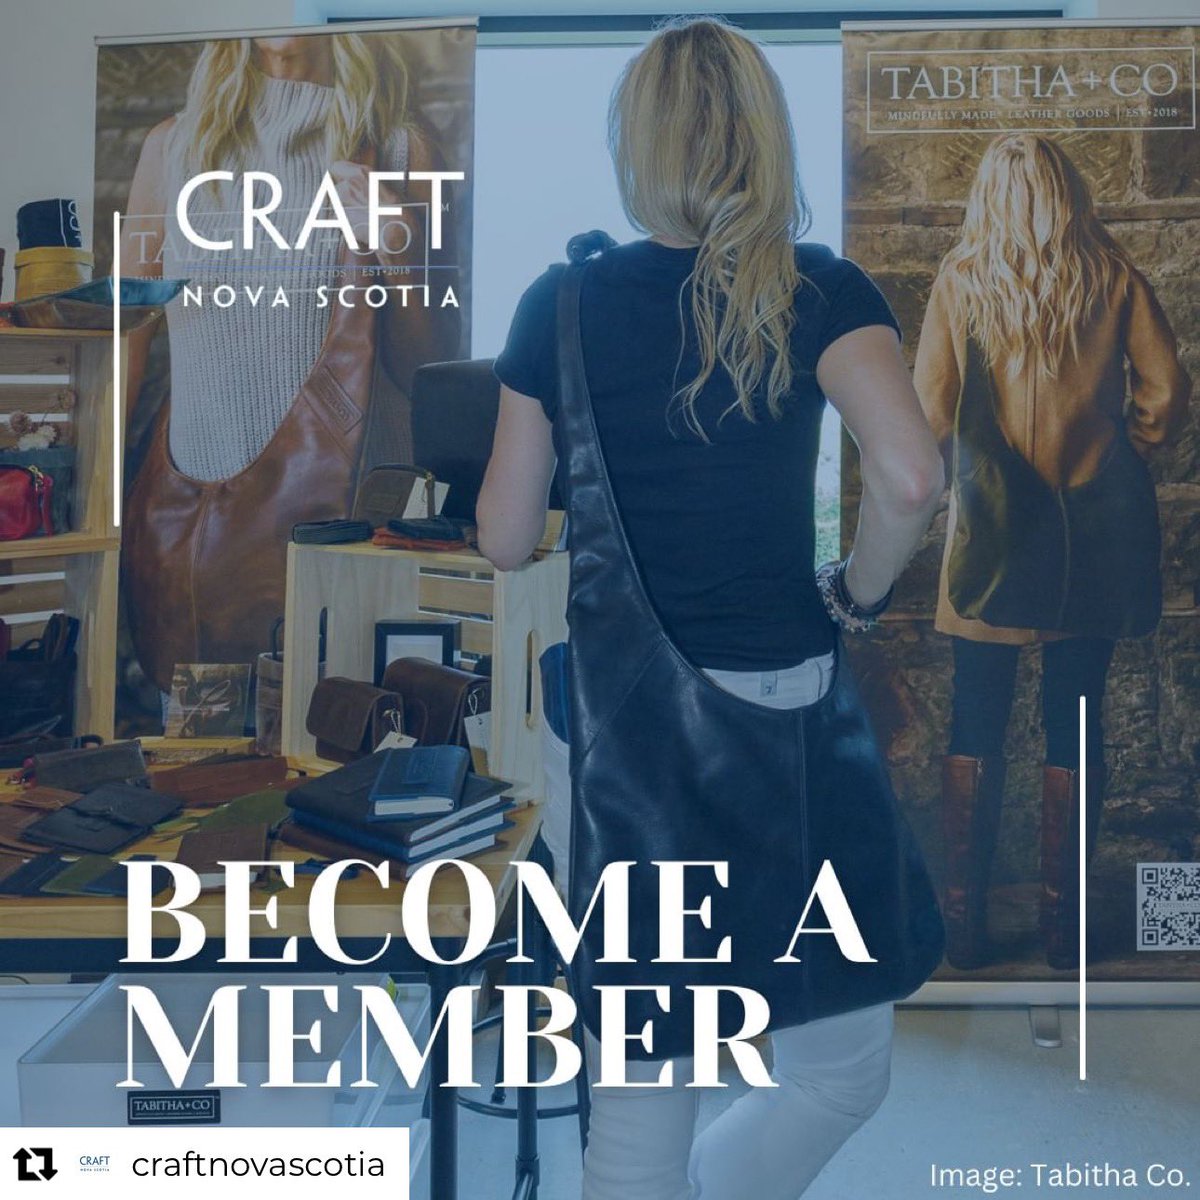 Elevate your craft! Calling all makers, consider joining the vibrant community of Craft Nova Scotia, or one of the other Atlantic Canadian craft organizations today! Gain exposure, network with fellow craftspeople, access valuable resources, and enjoy exclusive member benefits.…